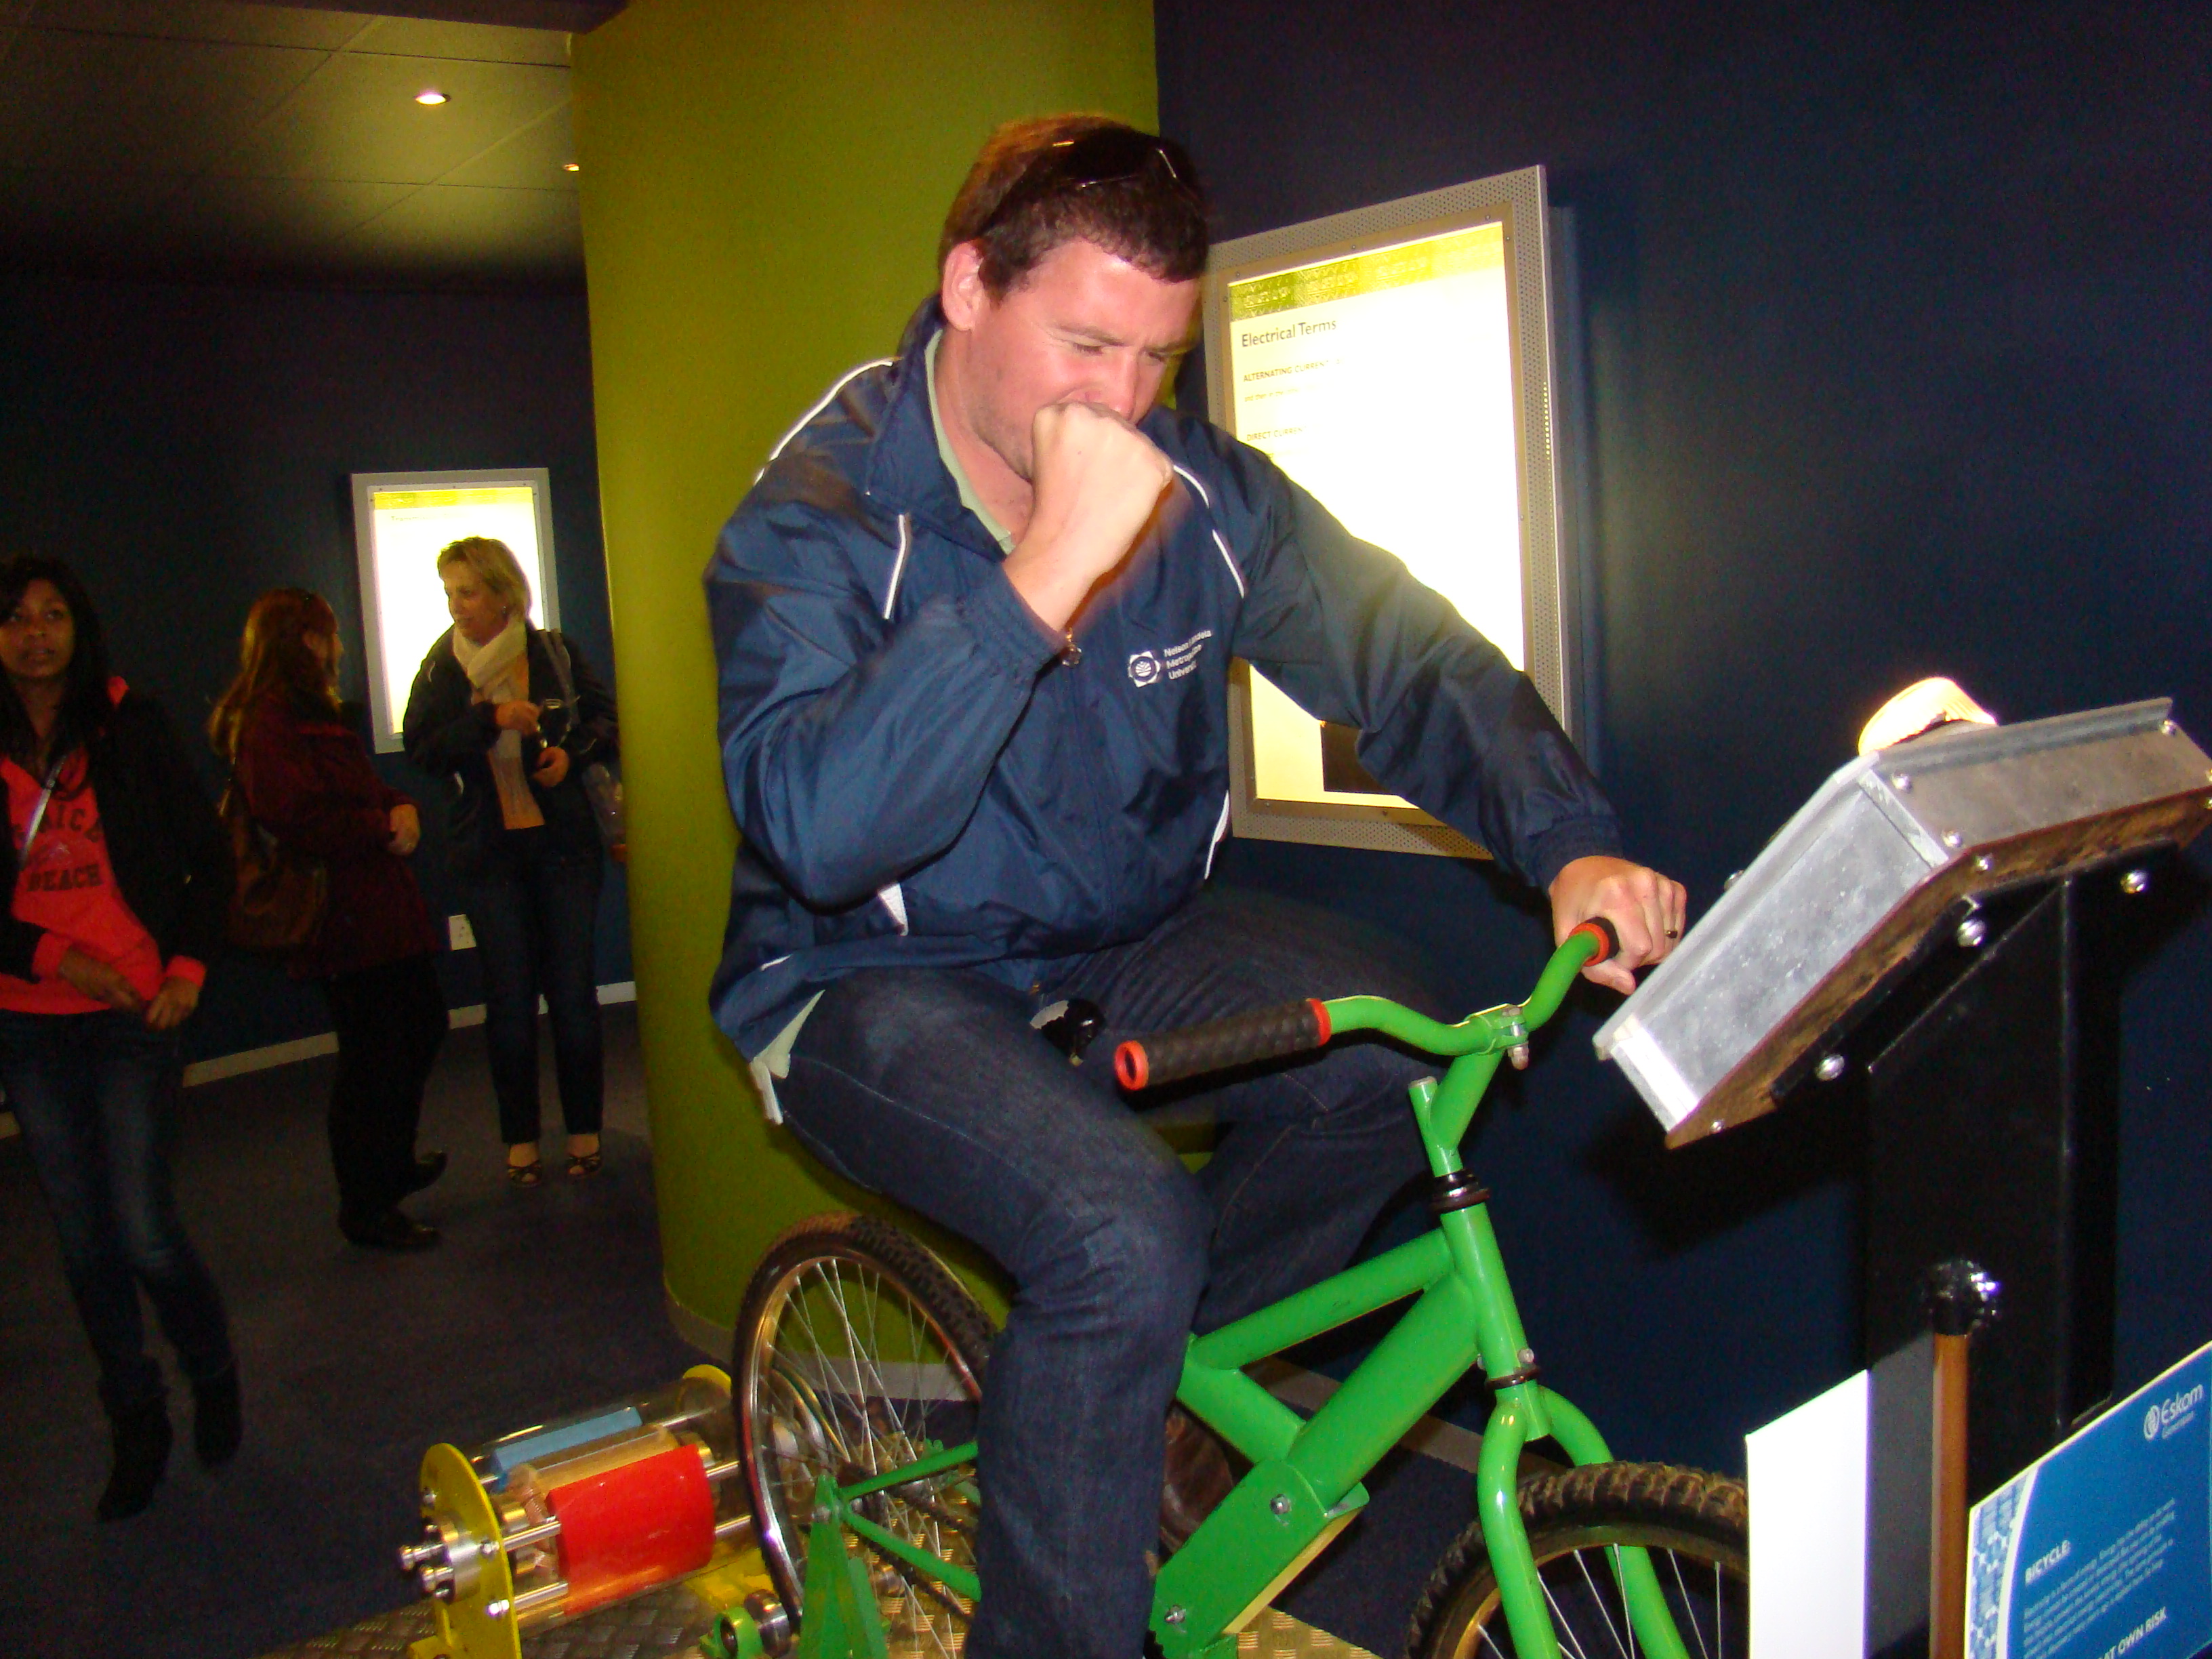 Paul trying out the bicycle